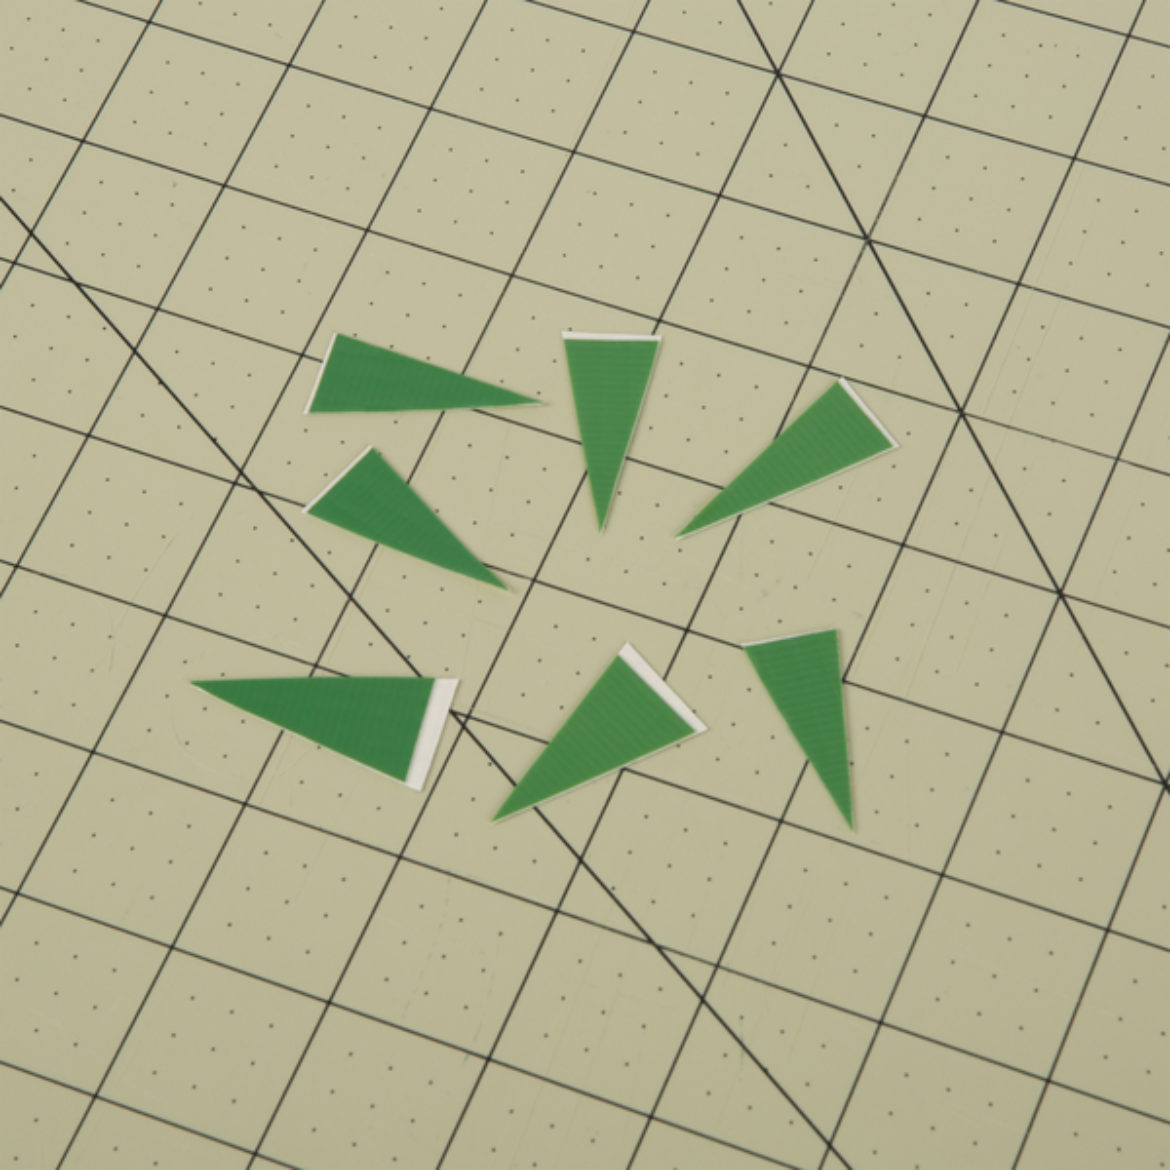 7 green Duck Tape triangles